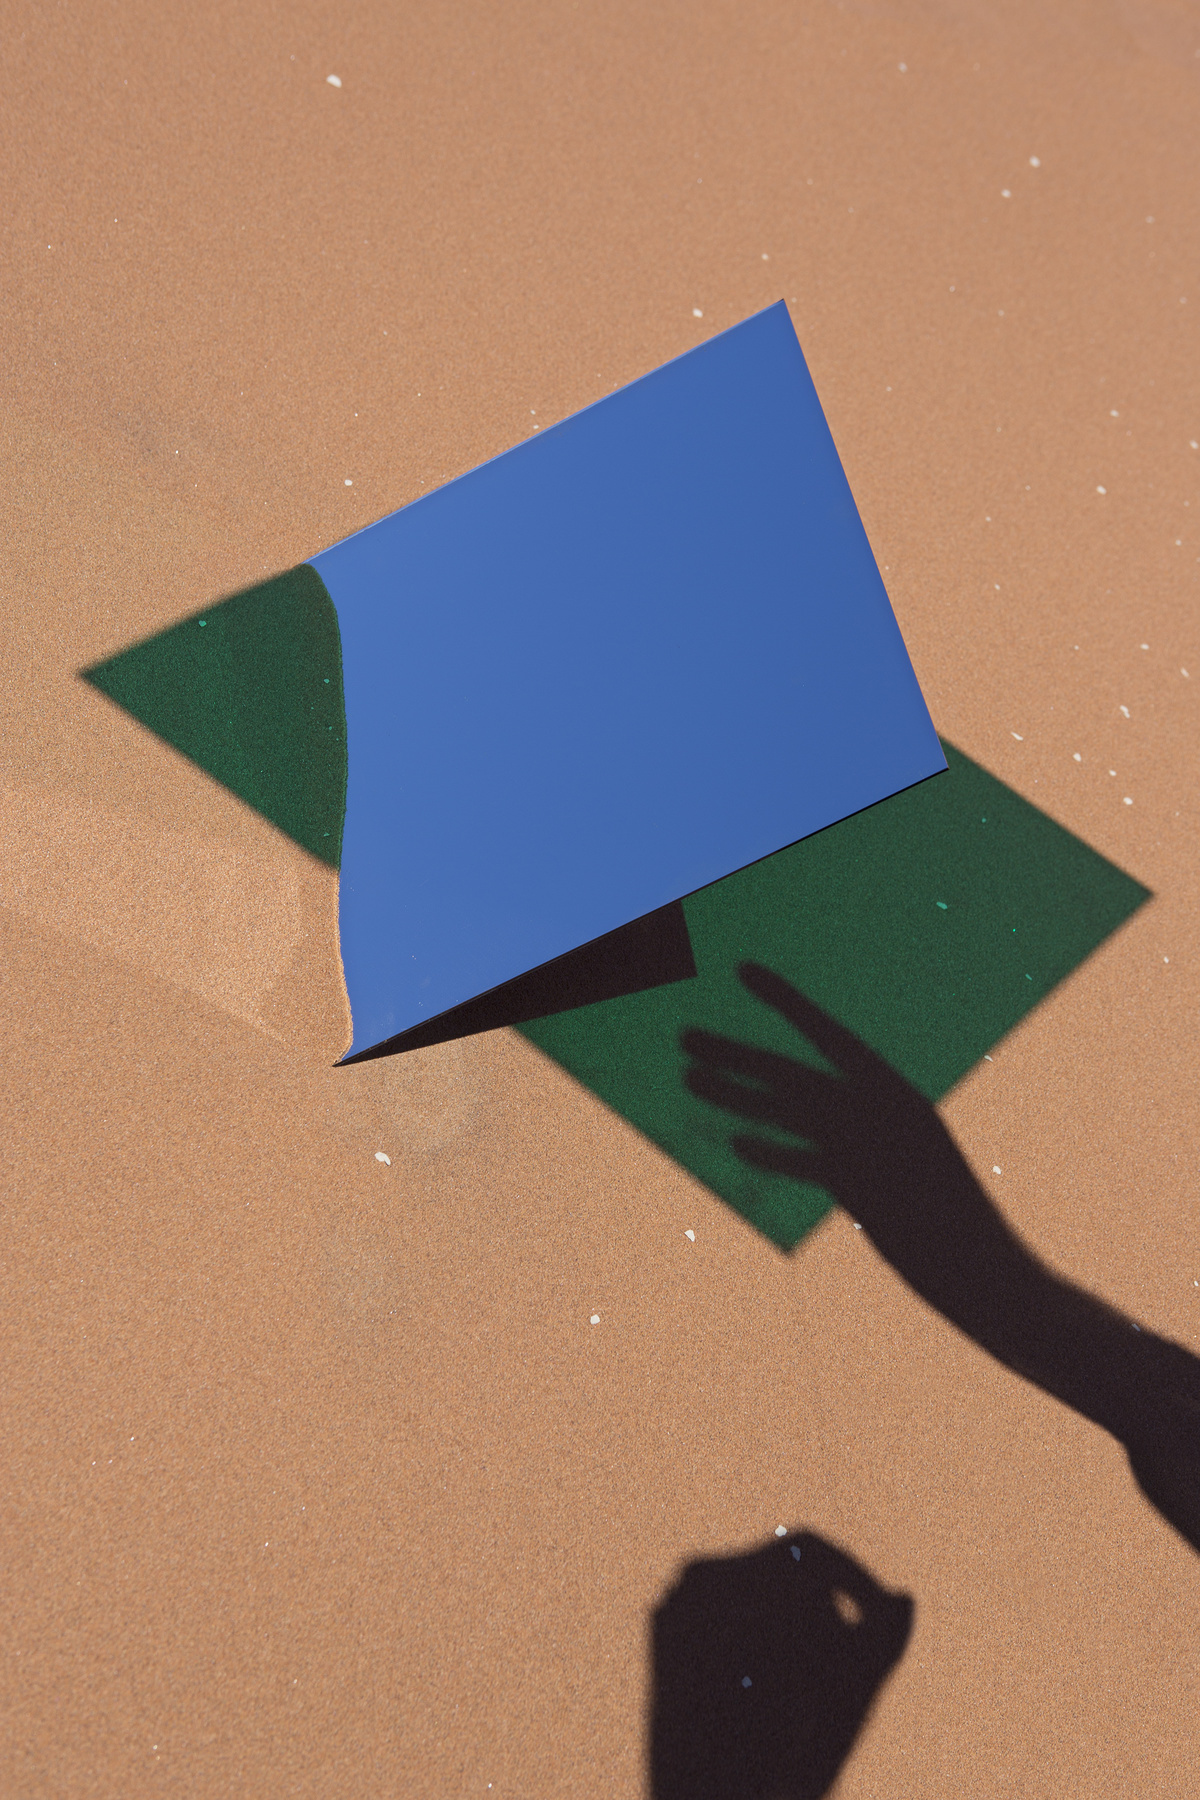 Dutch Photographer Viviane Sassen Gained Fame Through Aestheticized Images  of Africans. Now Criticism Is Making Her Reconsider Her Own Legacy